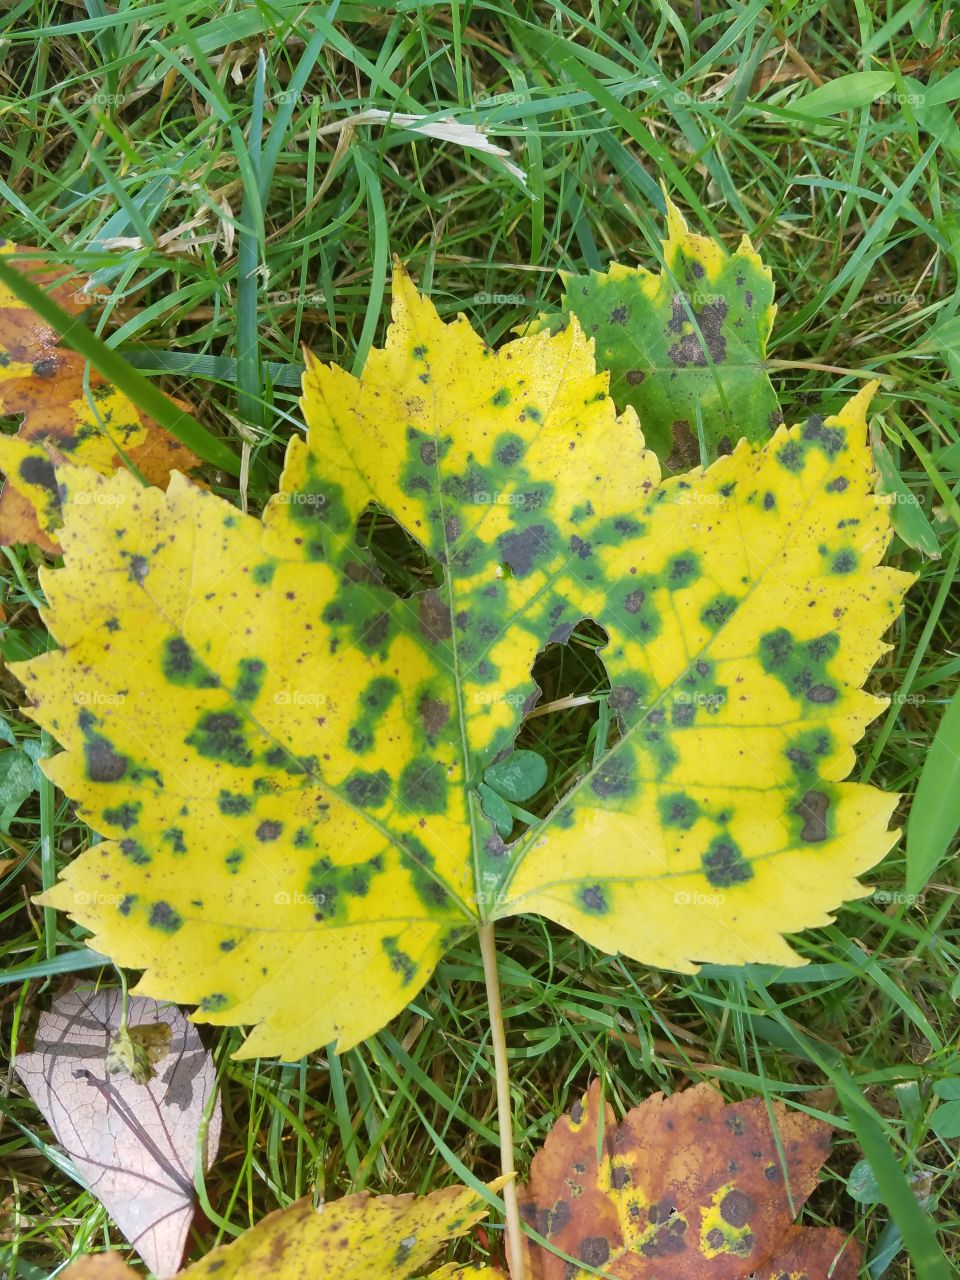 Leaf laying on the ground at the beginning of Autumn